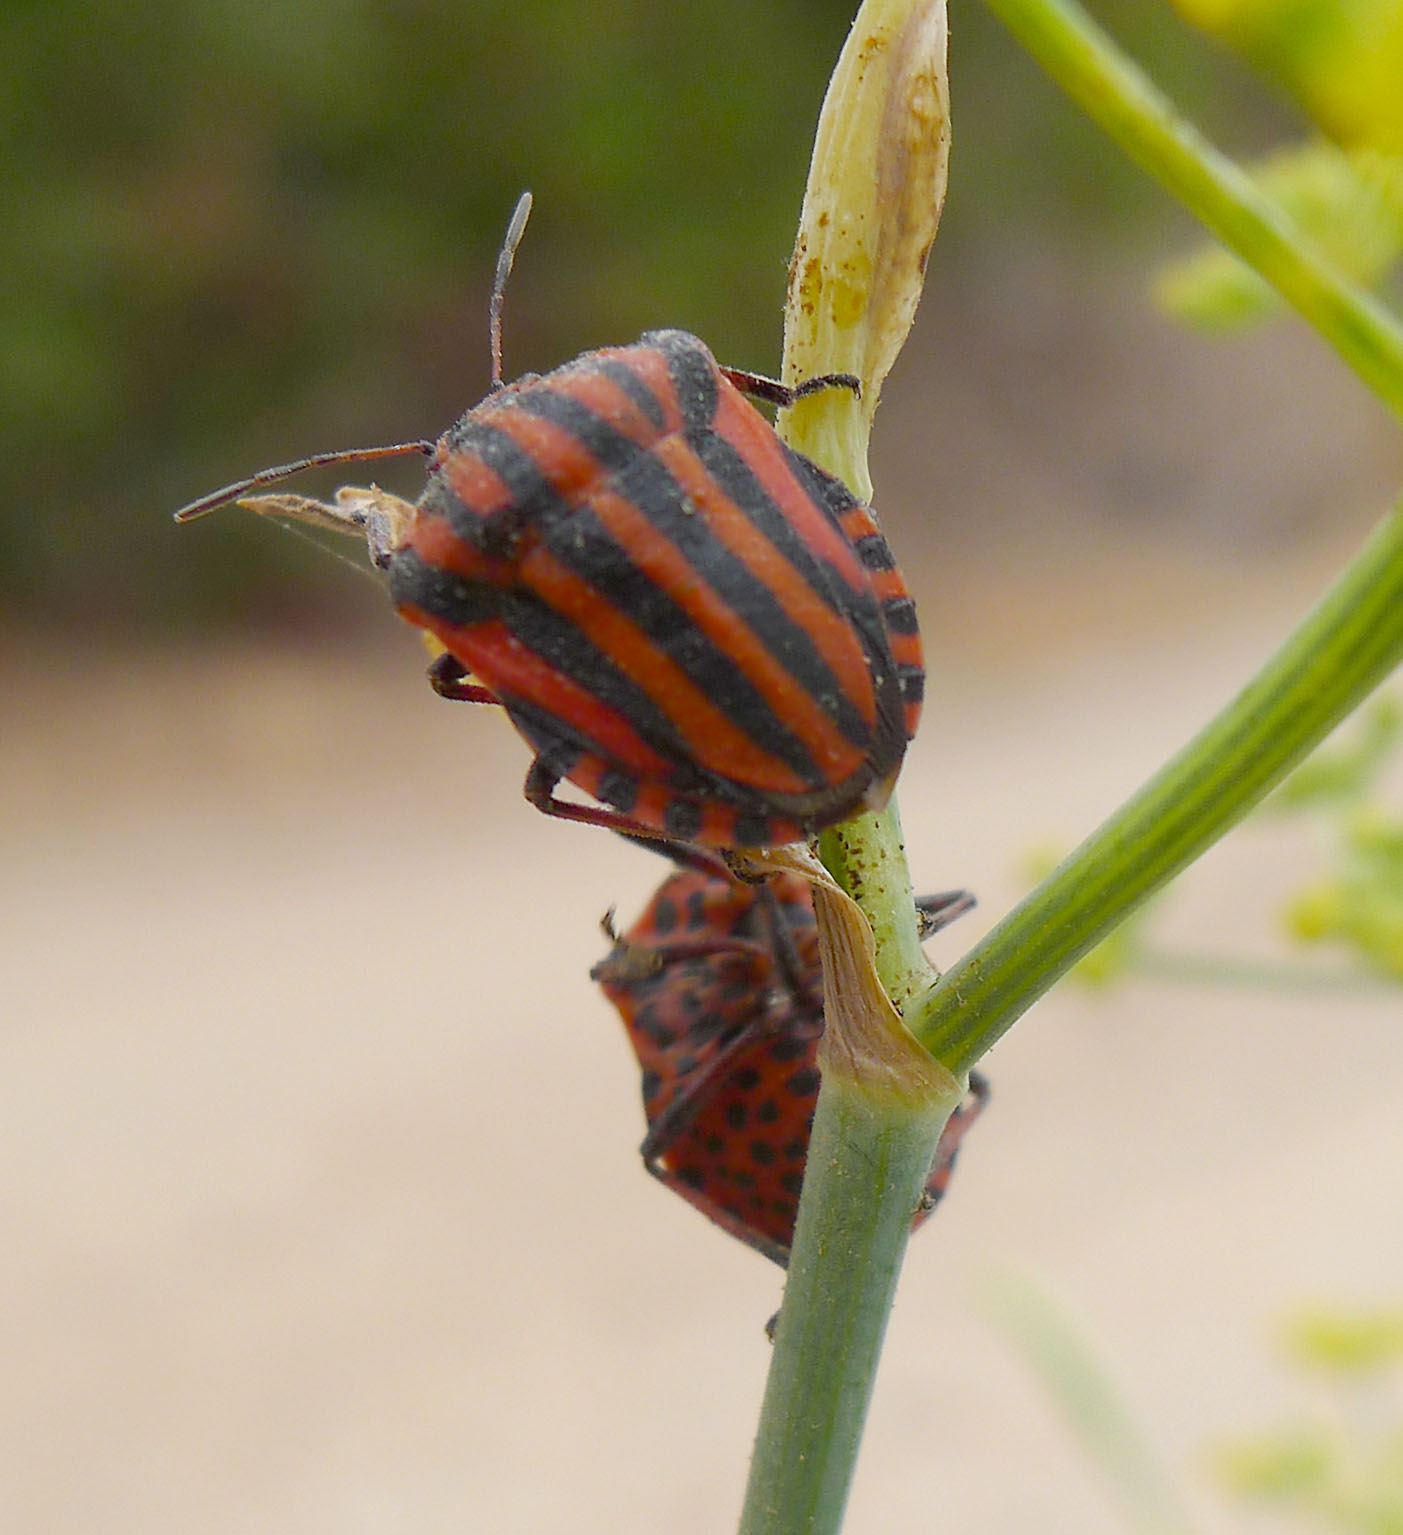 two striped bugs sitting on a flower bud